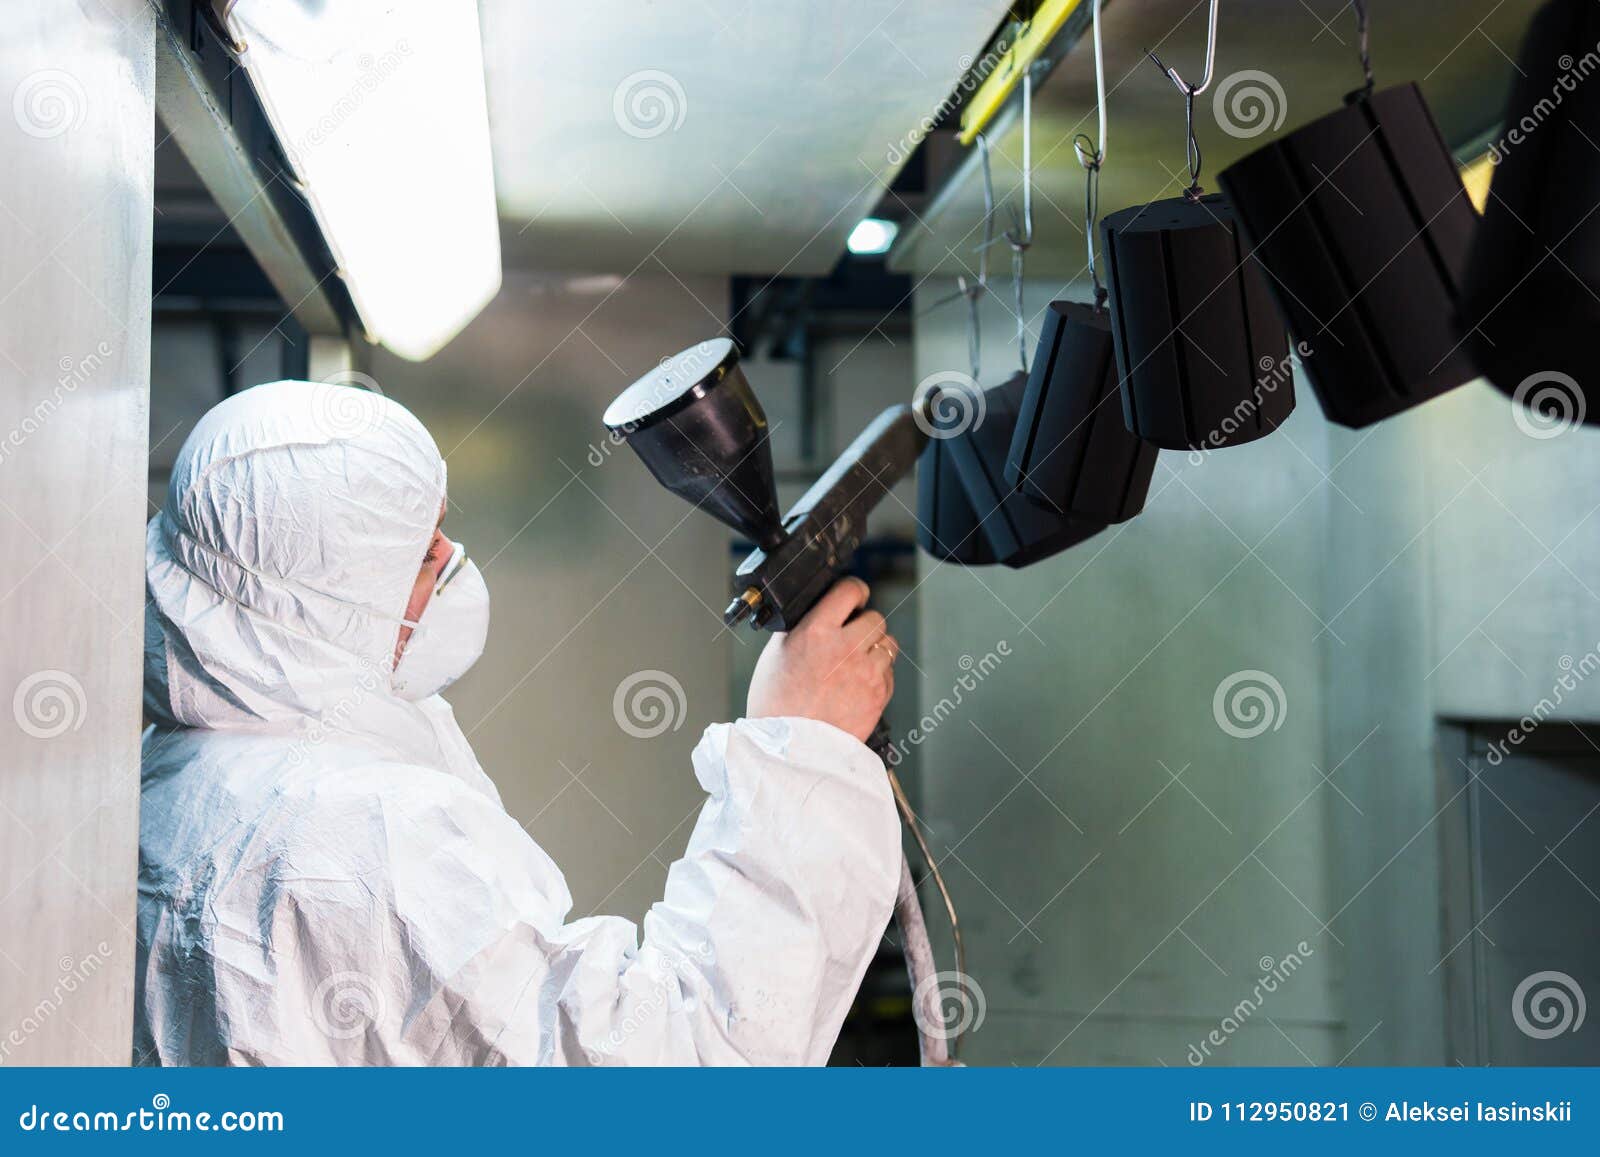 powder coating of metal parts. a man in a protective suit sprays powder paint from a gun on metal products